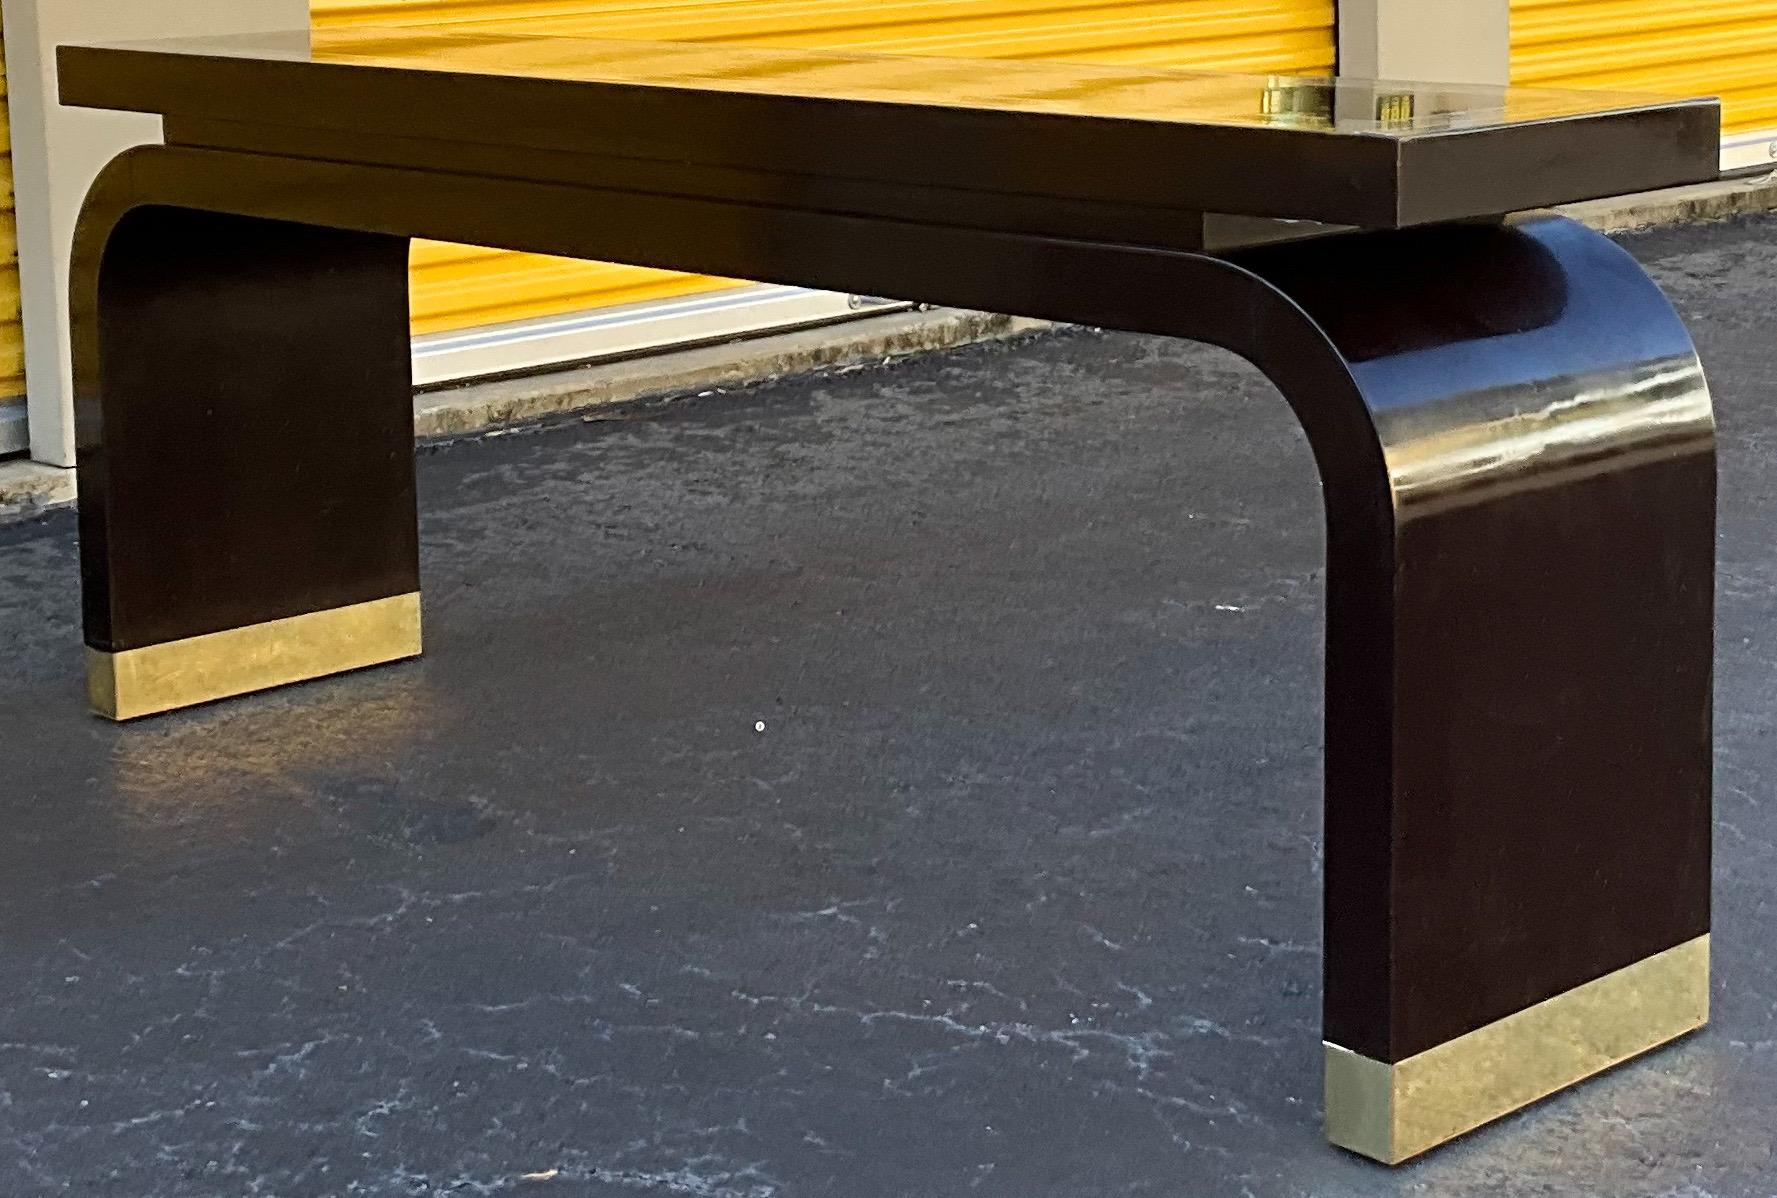 This is a sleek modern Ming style console table by Baker Furniture Company. The piece has an espresso finish with a high gloss clear coat. The top has a faux marble painted inset stripe. The base has brass caps that show some wear. It is marked.